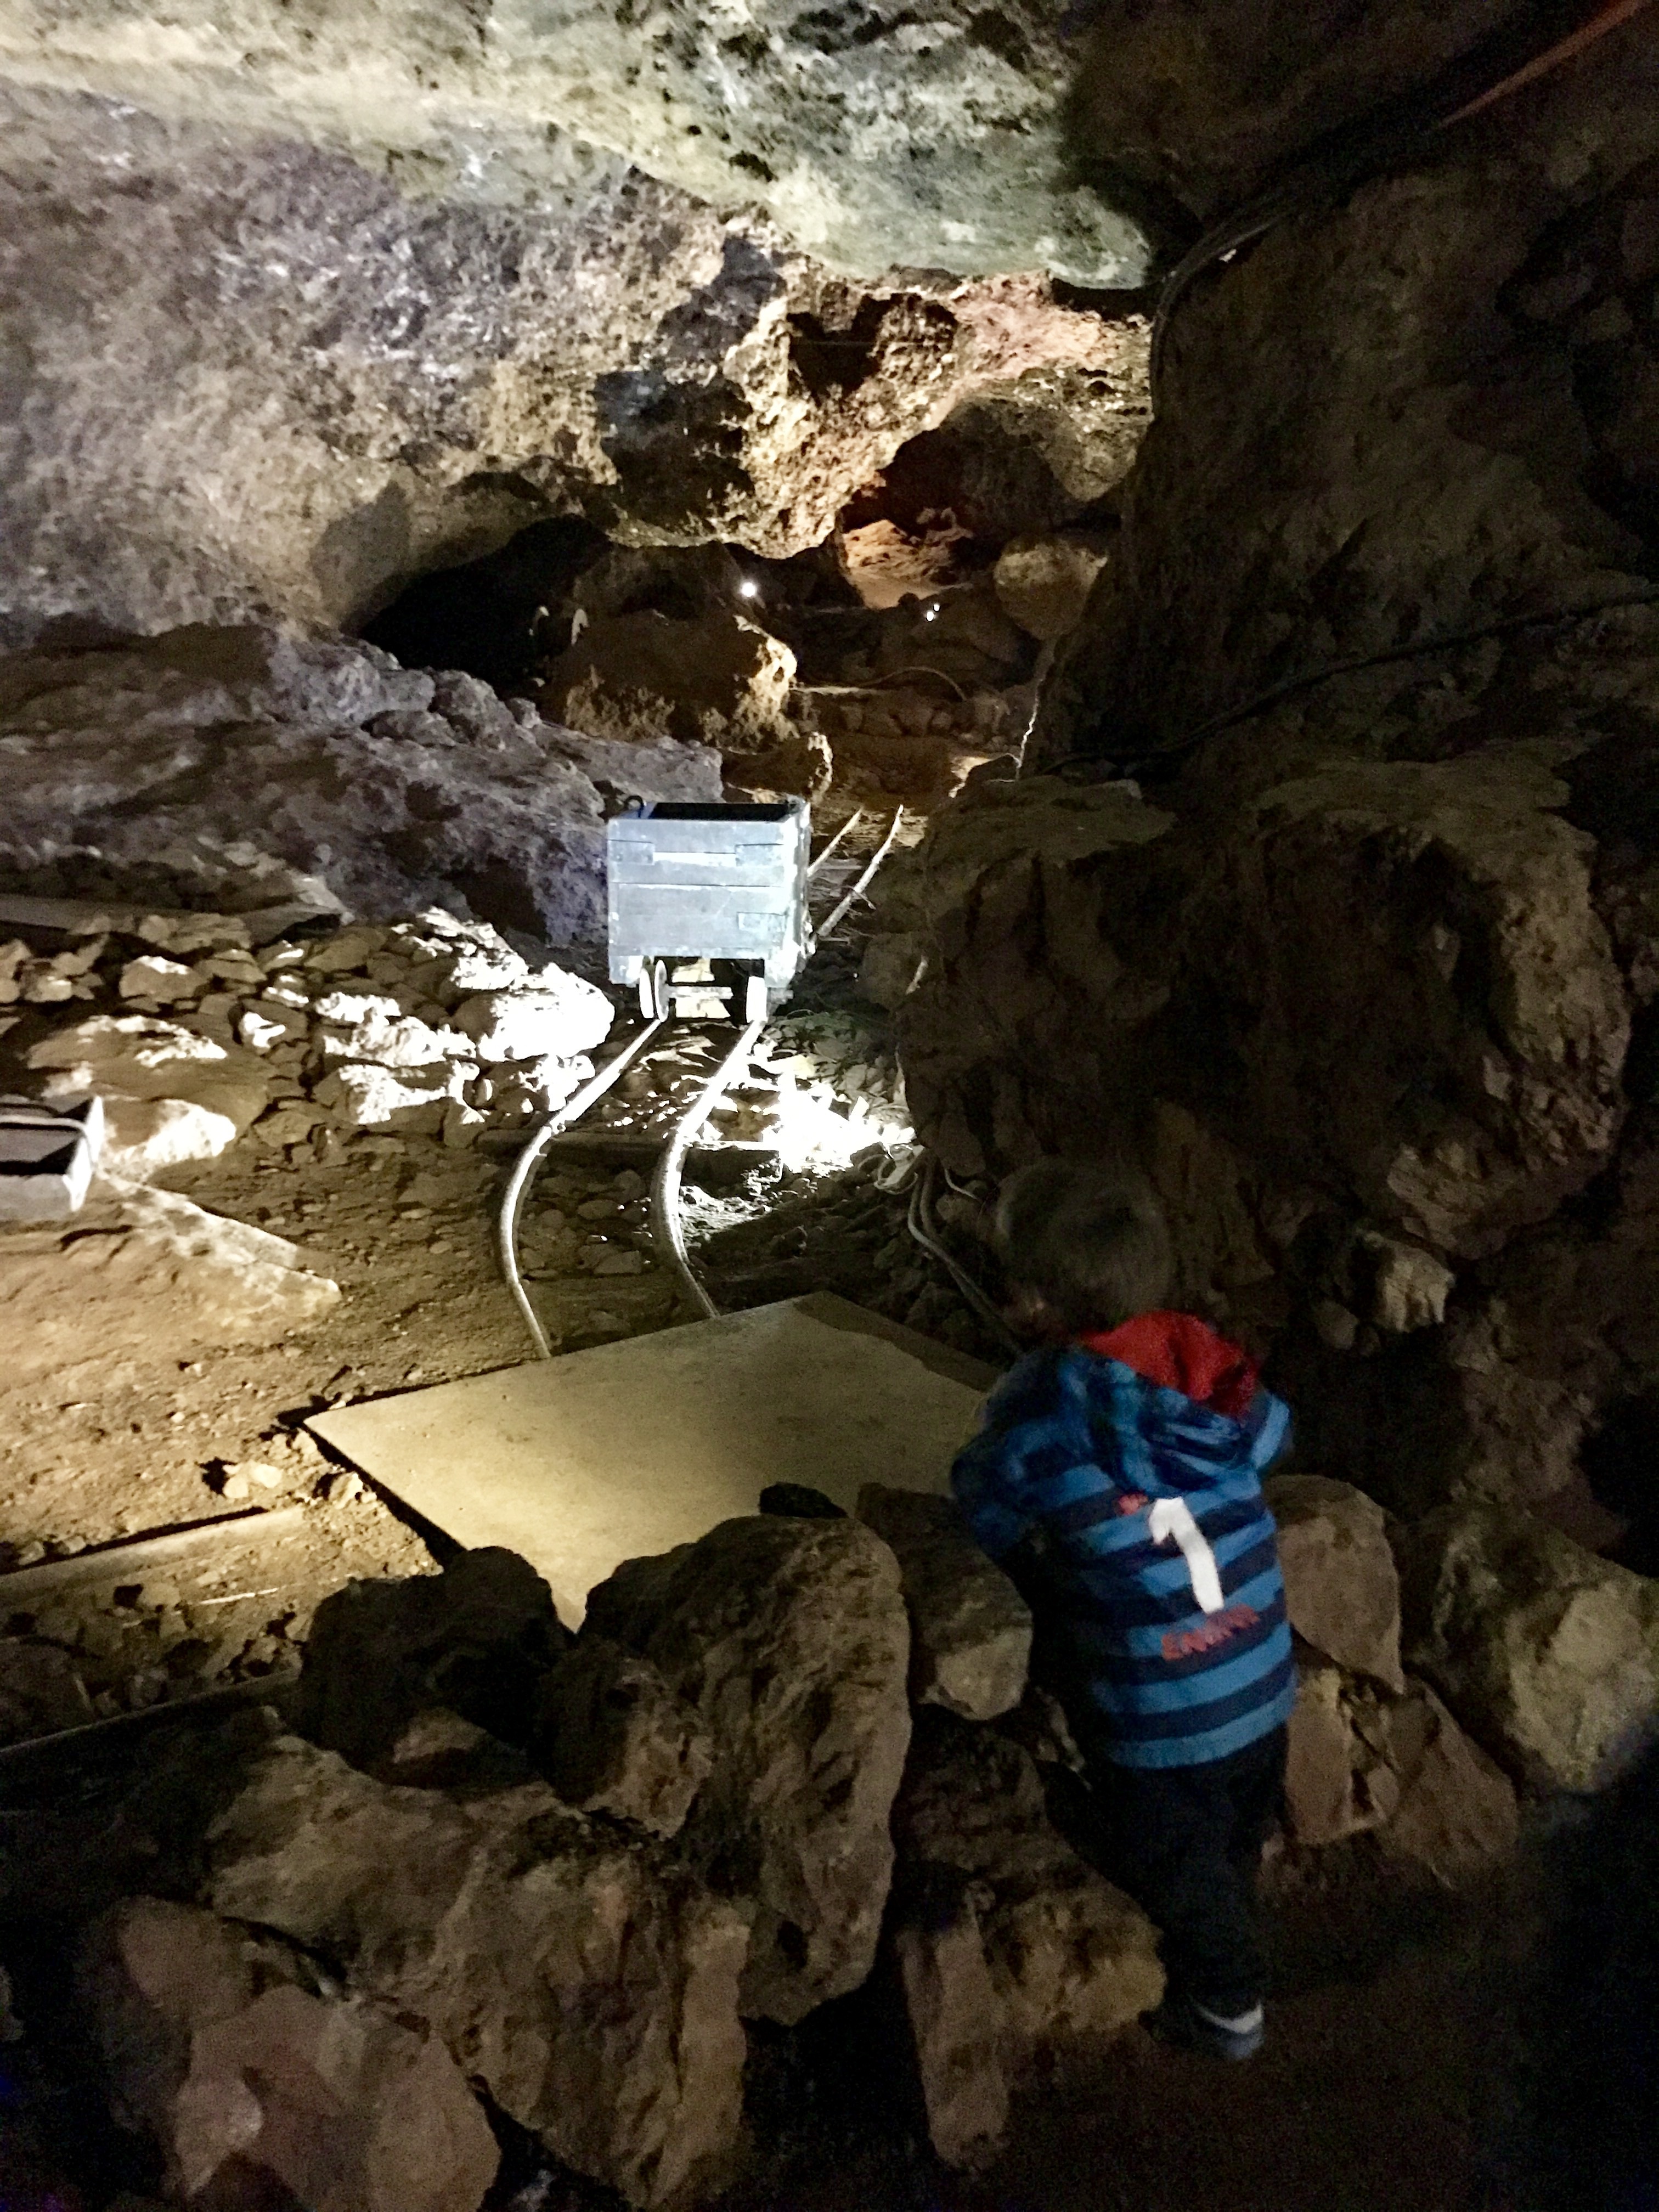 Clearwell Caves